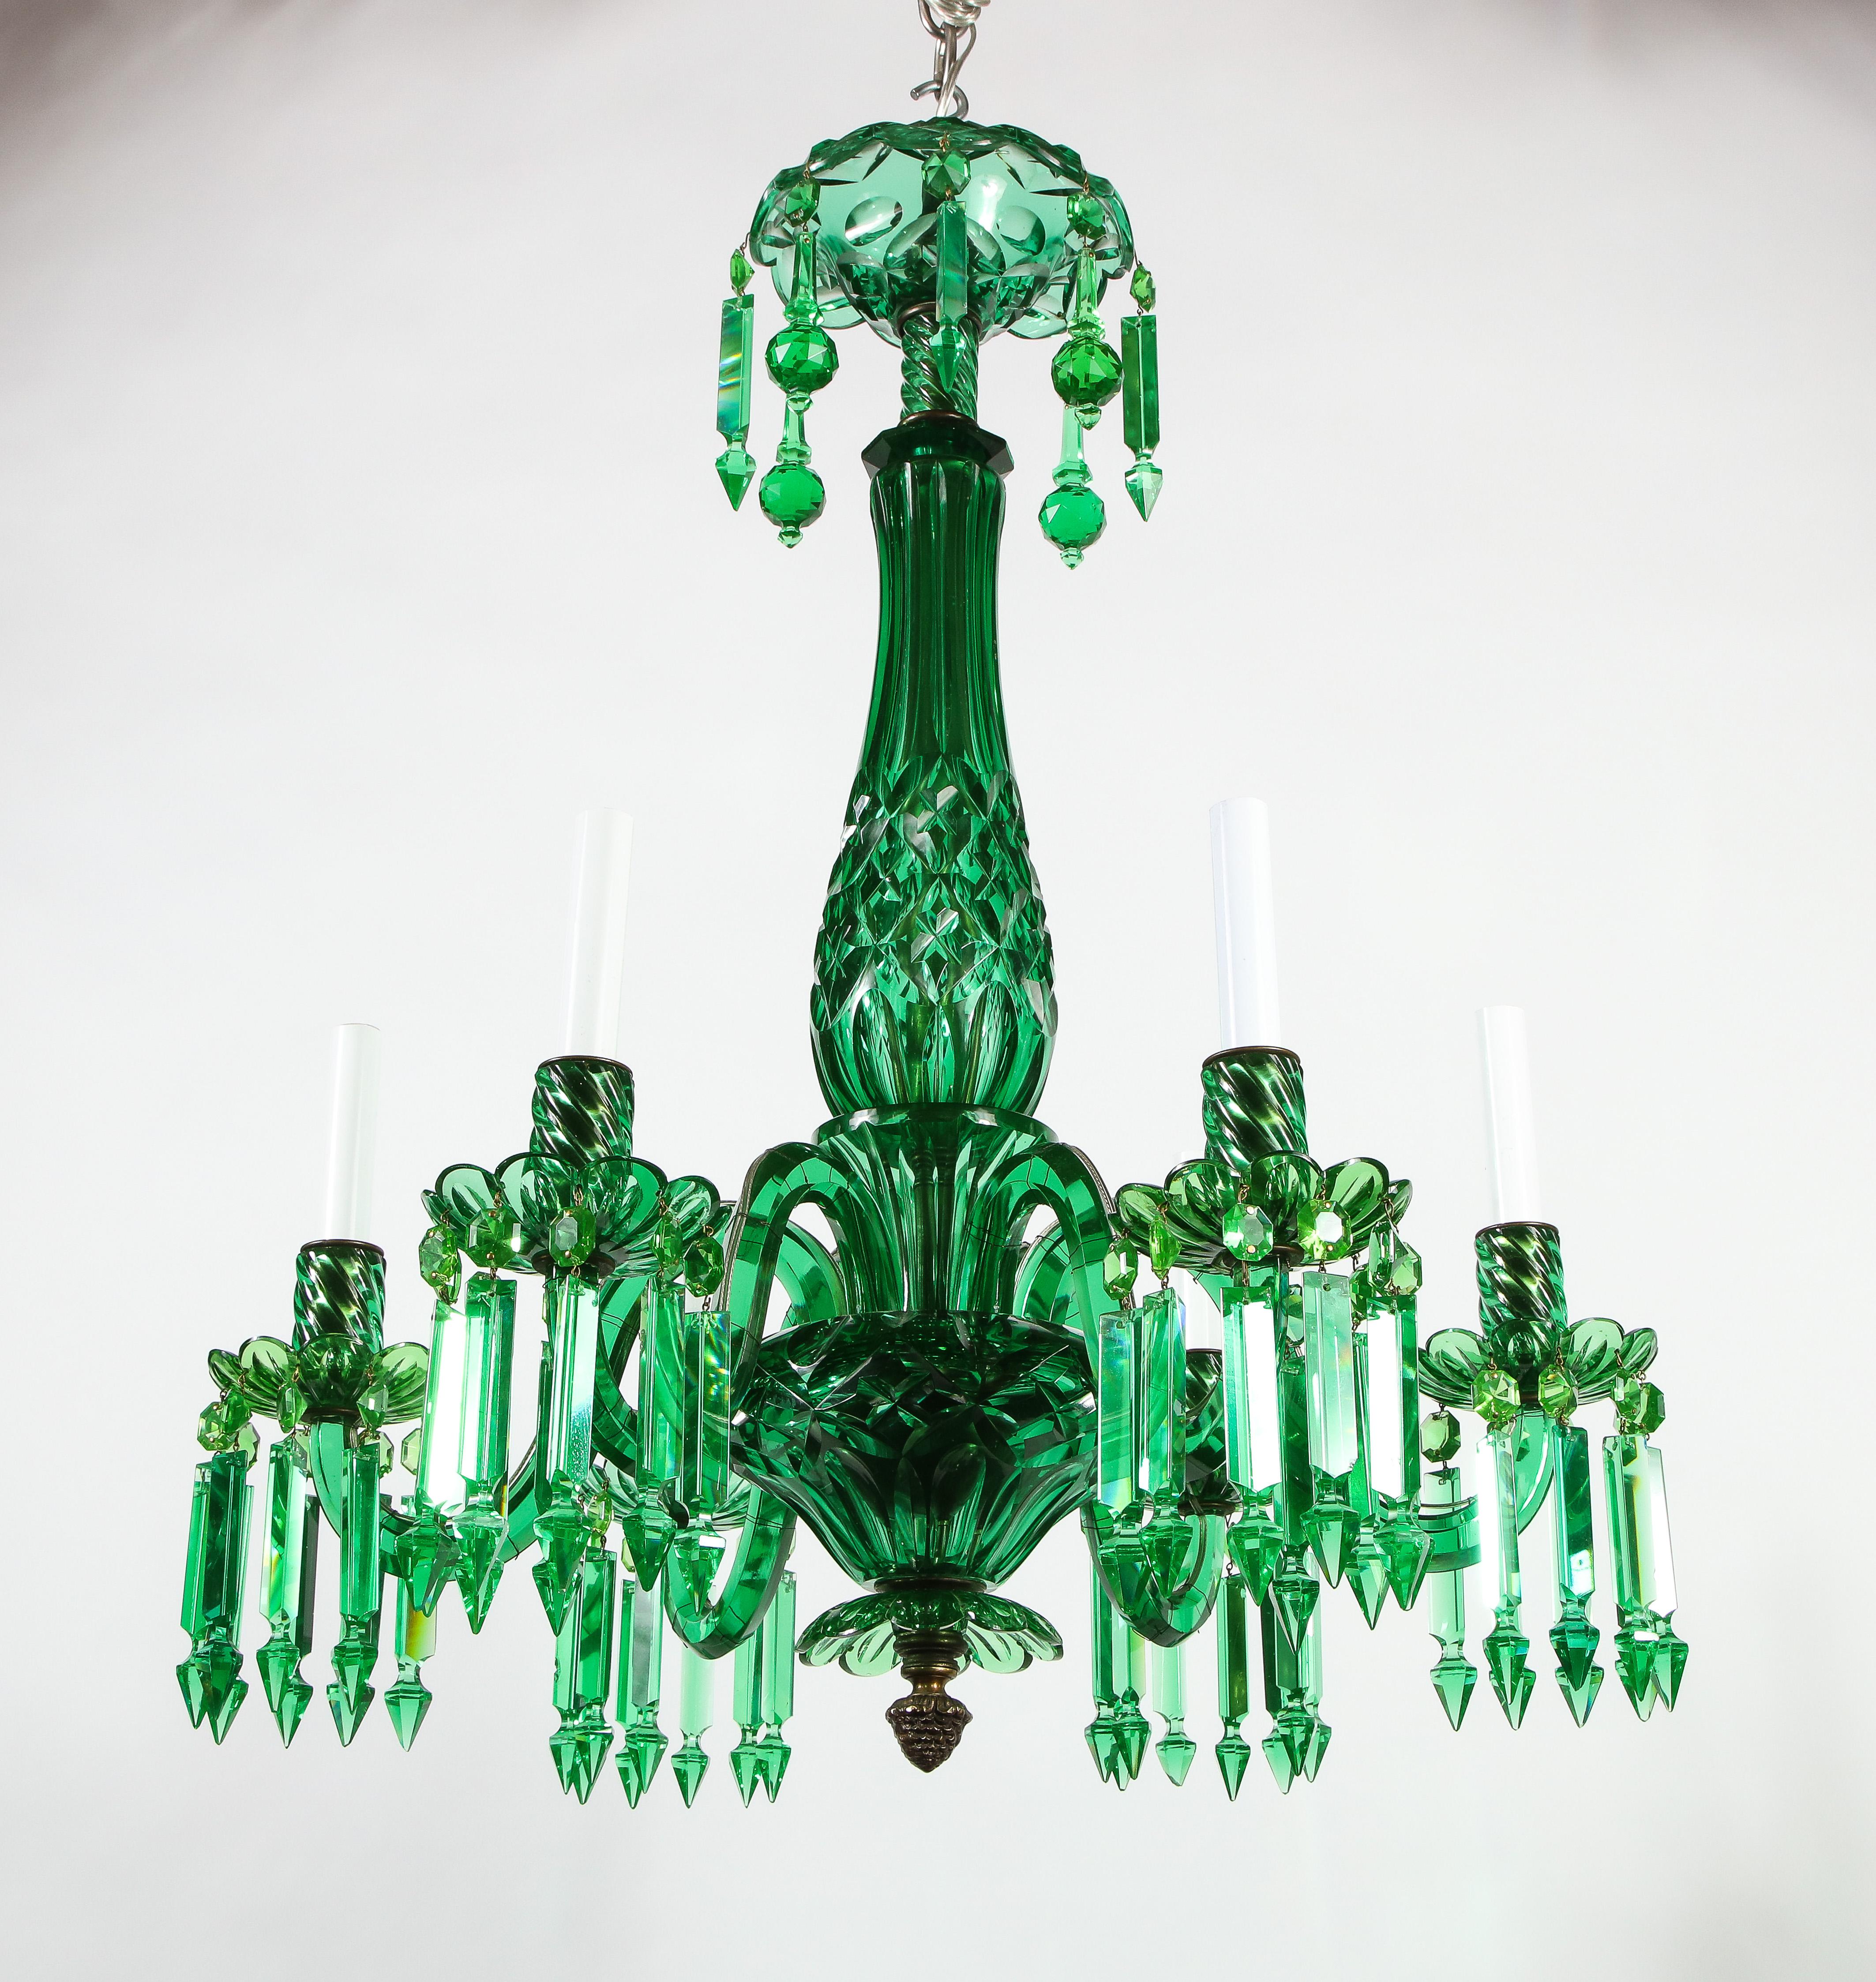 An incredible 19th century English six-arm green crystal chandelier, attributed to F. & C. Osler, London. Each crystal section is beautifully hand-diamond cut with extreme precision. The crystal is made to be a fabulous rich emerald color, which is